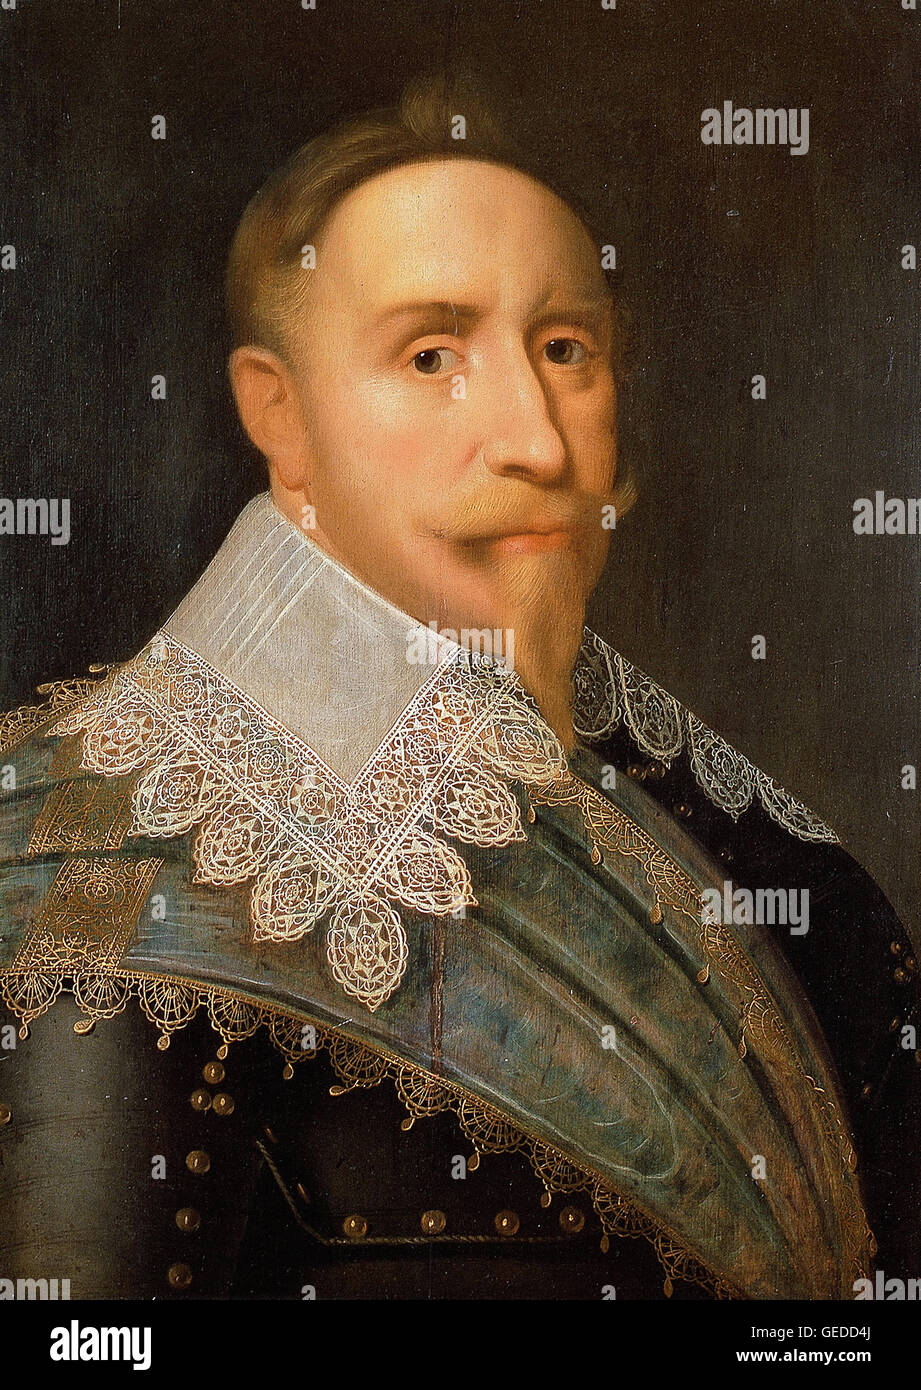 Attributed to Jacob Hoefnagel - Gustavus Adolphus, King of Sweden 1611-1632 Stock Photo